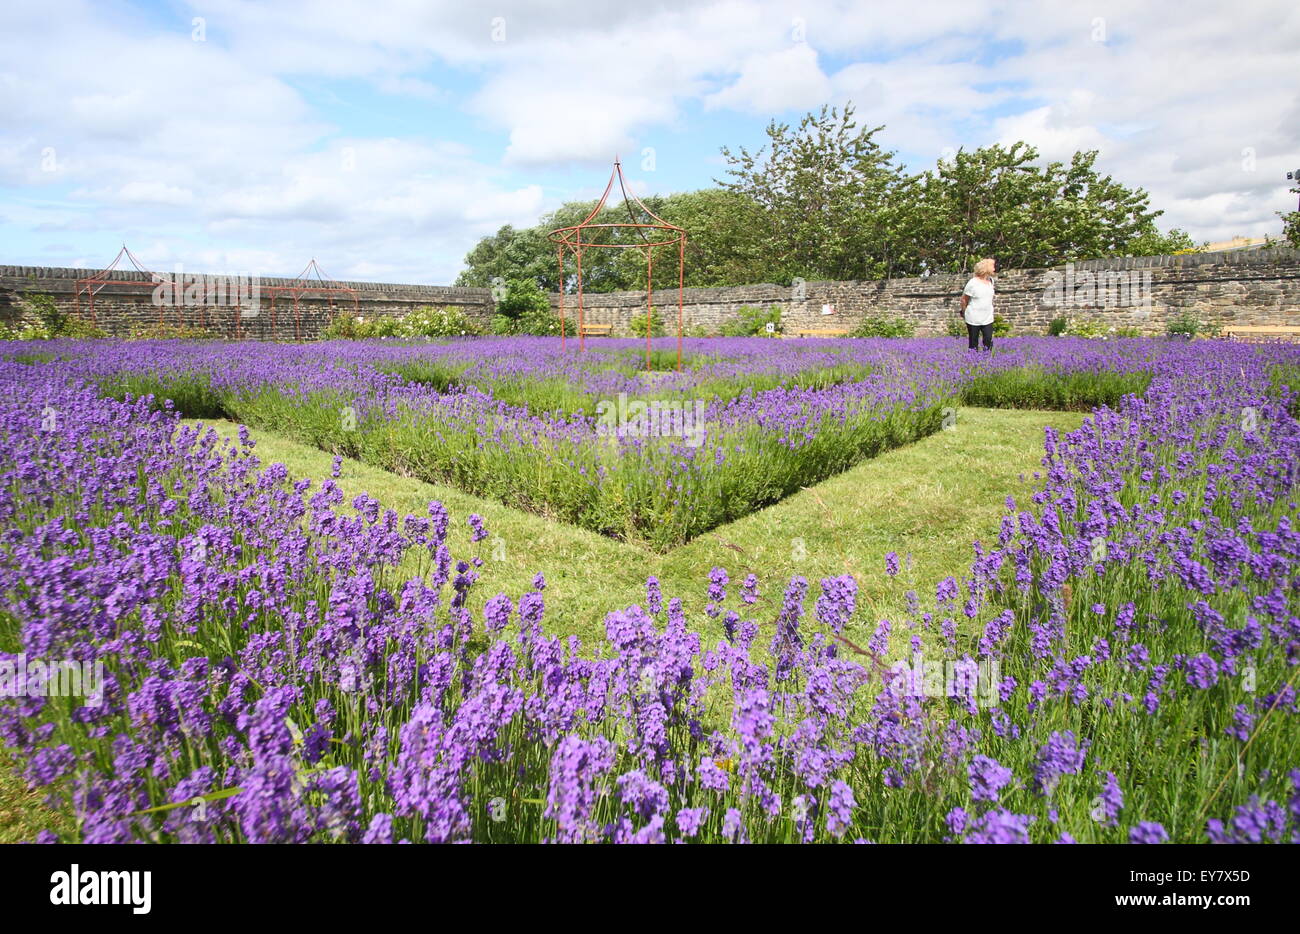 A woman walks among English lavender growing in borders to form a lavender labyrinth, Sheffield, South Yorkshire, England UK Stock Photo